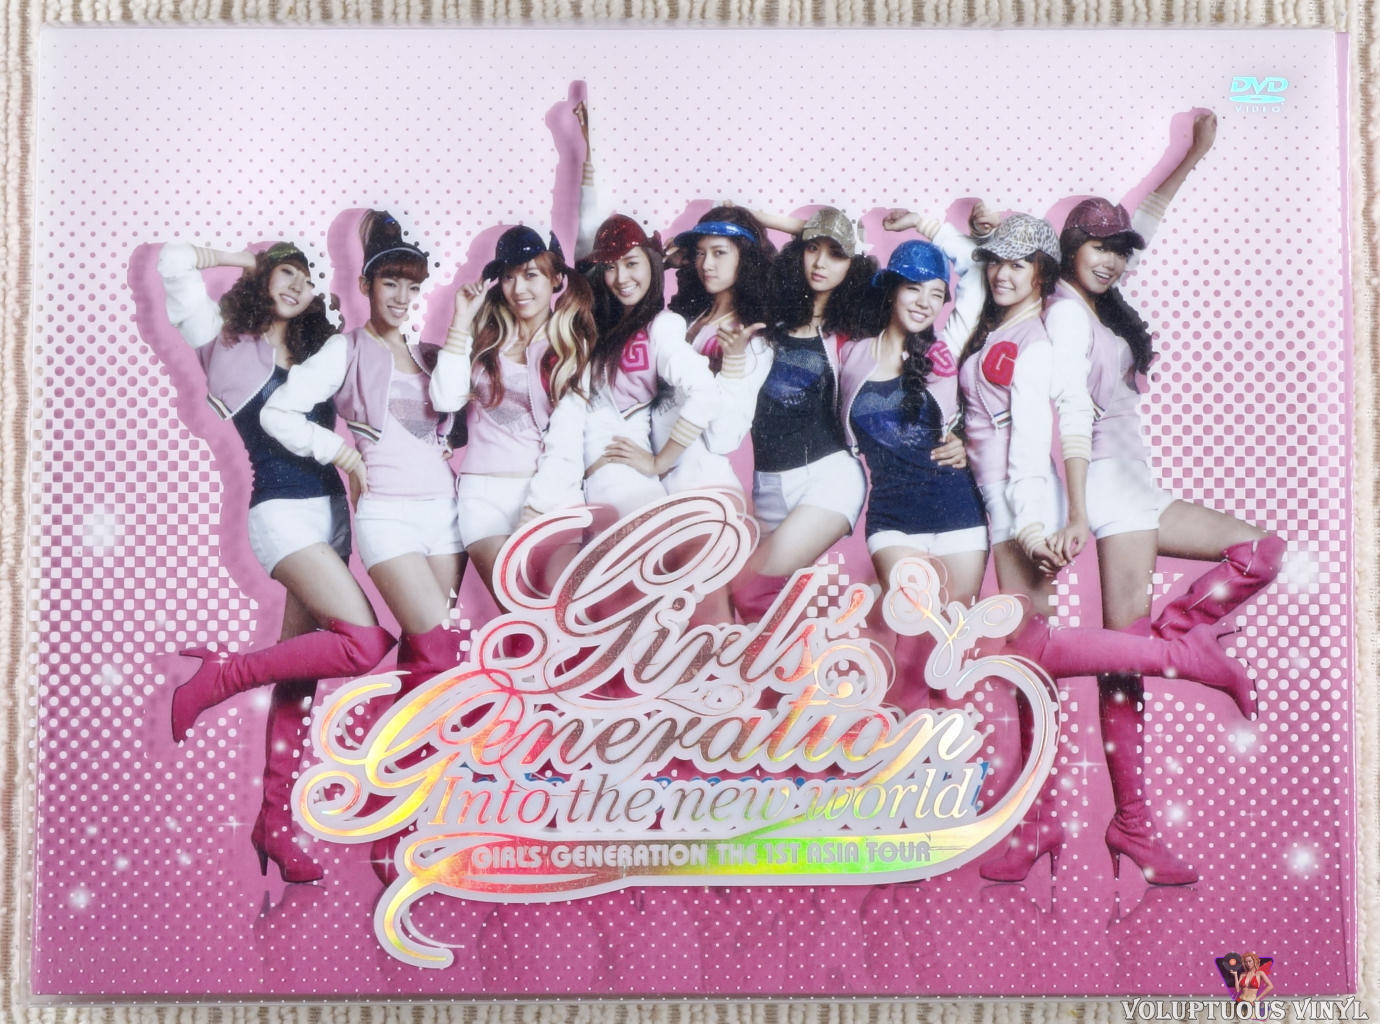 Girls' Generation – Into The New World: The 1st Asia Tour (2011) 2 